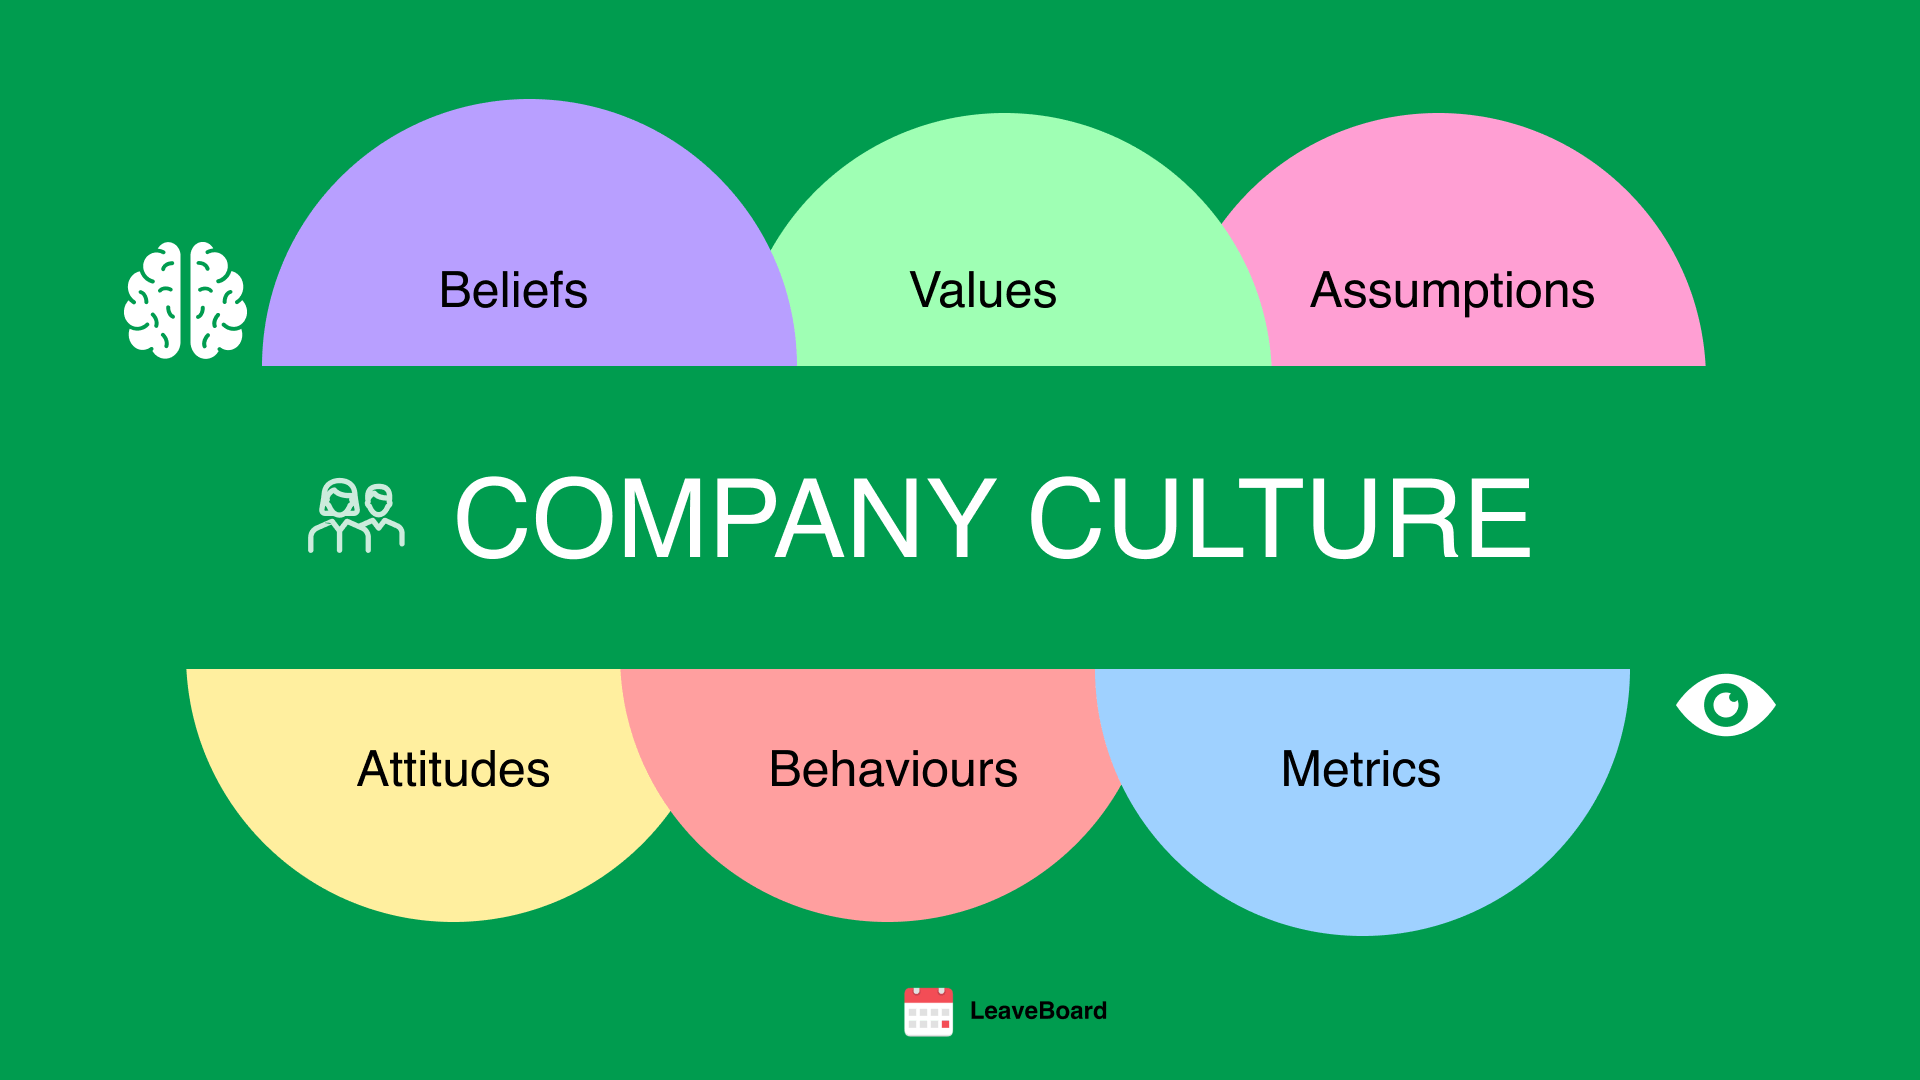 Can you have workplace culture without a traditional workplace?